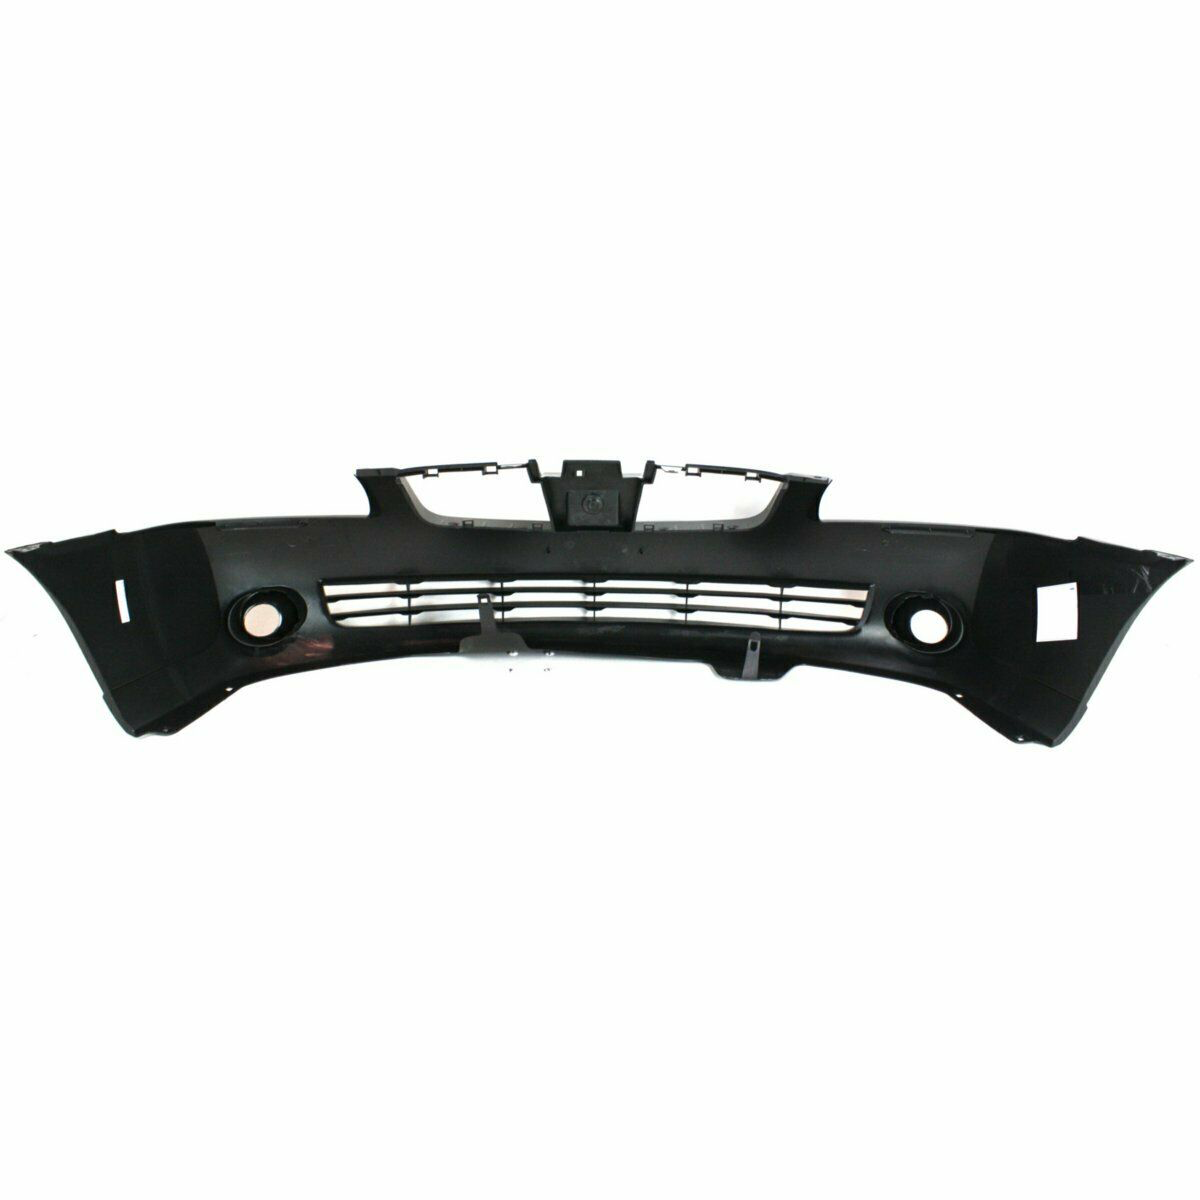 2004-2006 Nissan Sentra Sedan Front Bumper Painted to Match